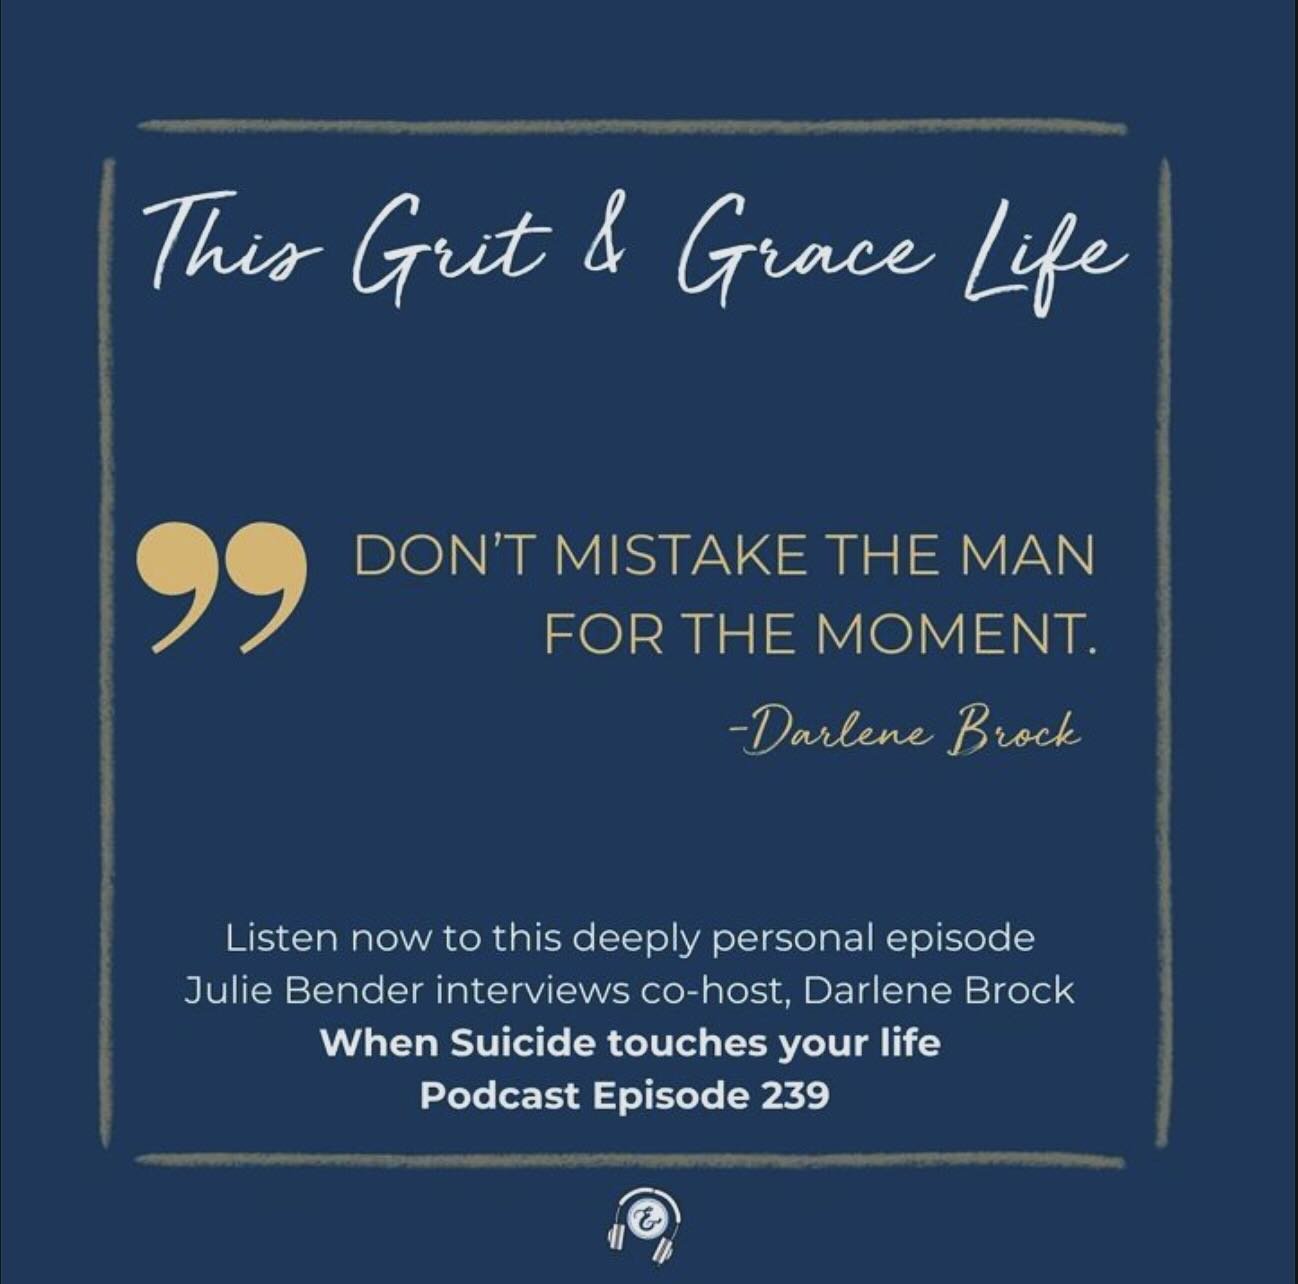 We tackle many difficult subjects at Grit and Grace Life, and often, they&rsquo;re ones that have impacted us directly. In this episode, co-host Darlene Brock shares one of her own&mdash;losing her father to suicide.

As with any tragedy, Darlene fou